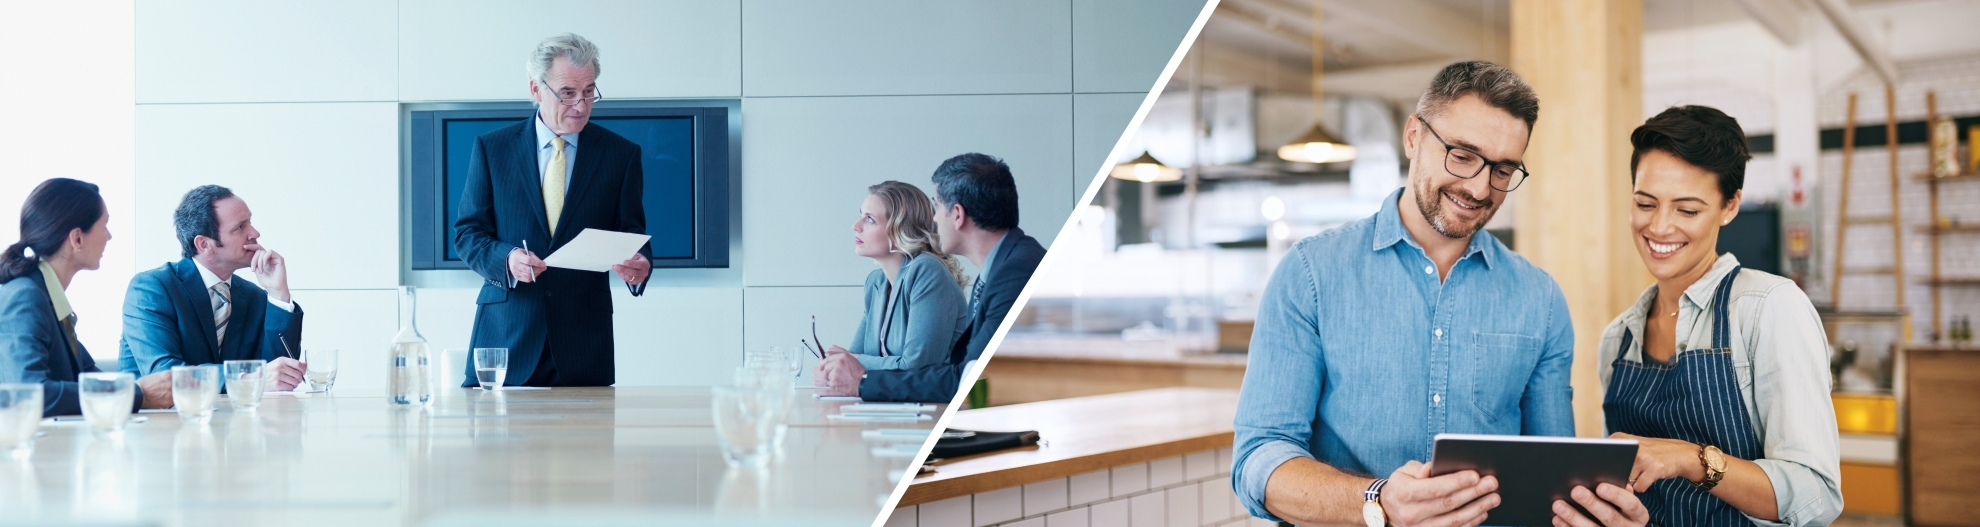 Left image: business executives having a meeting in conference room. Right image: Coffee Shop business owner looking at tablet with worker. 